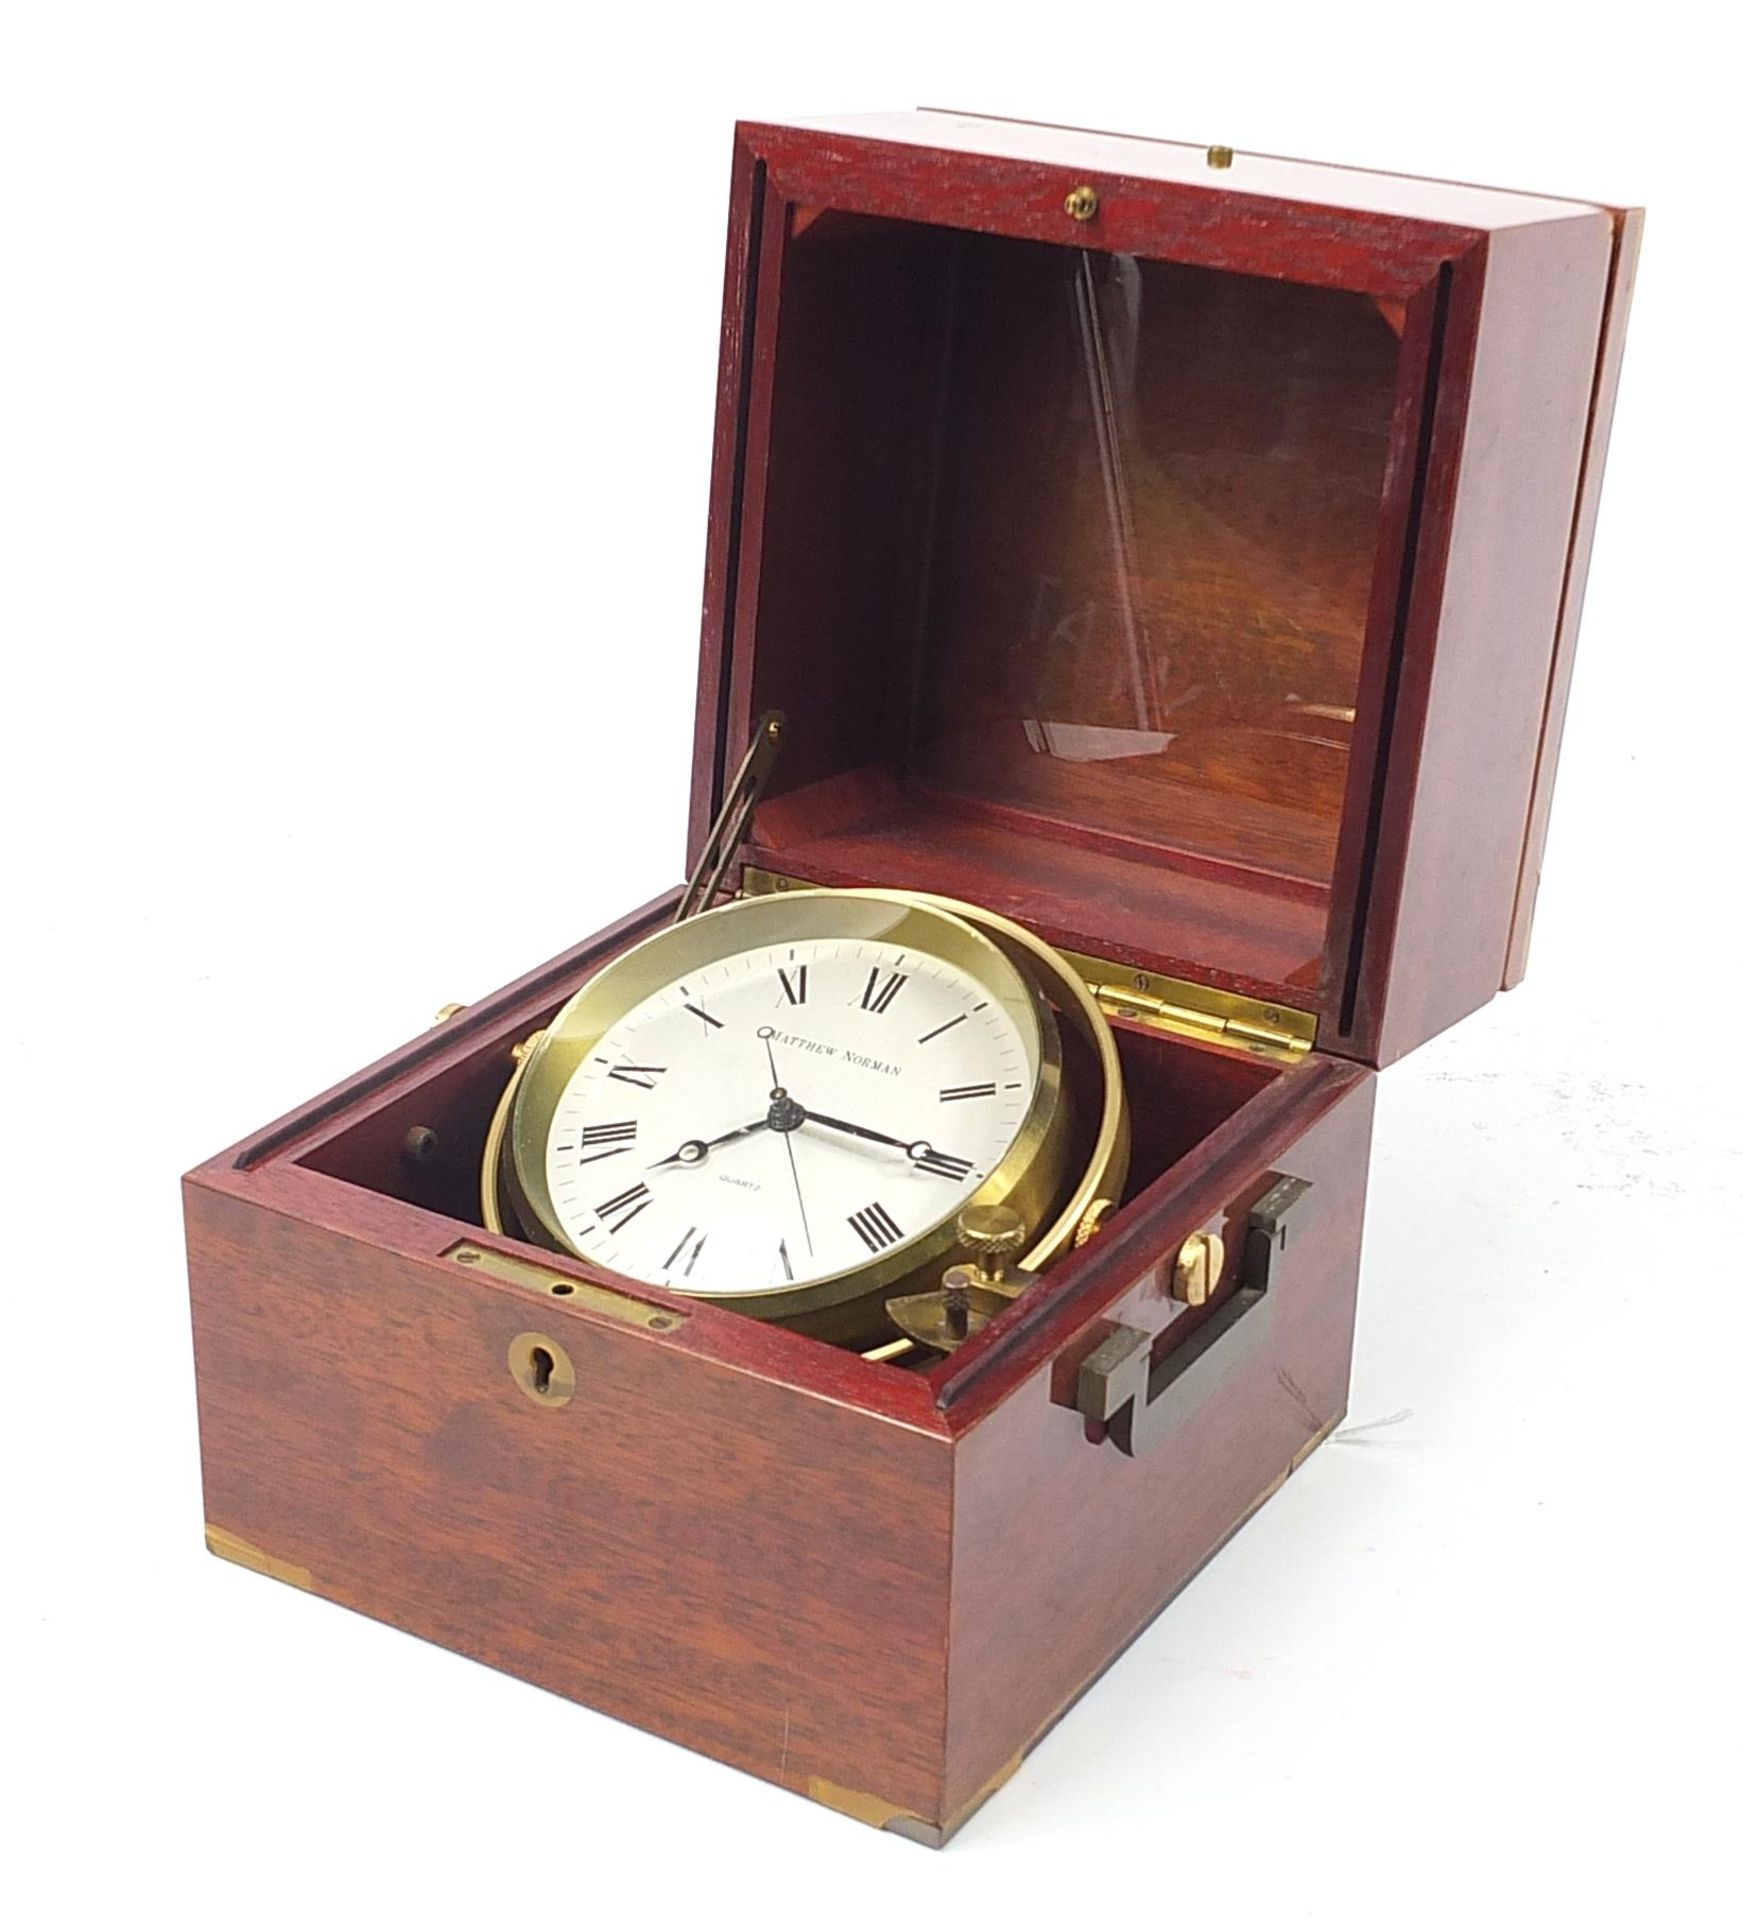 Matthew Norman ship's design clock housed in a mahogany case with brass mounts, 17.5cm x 17cm W x